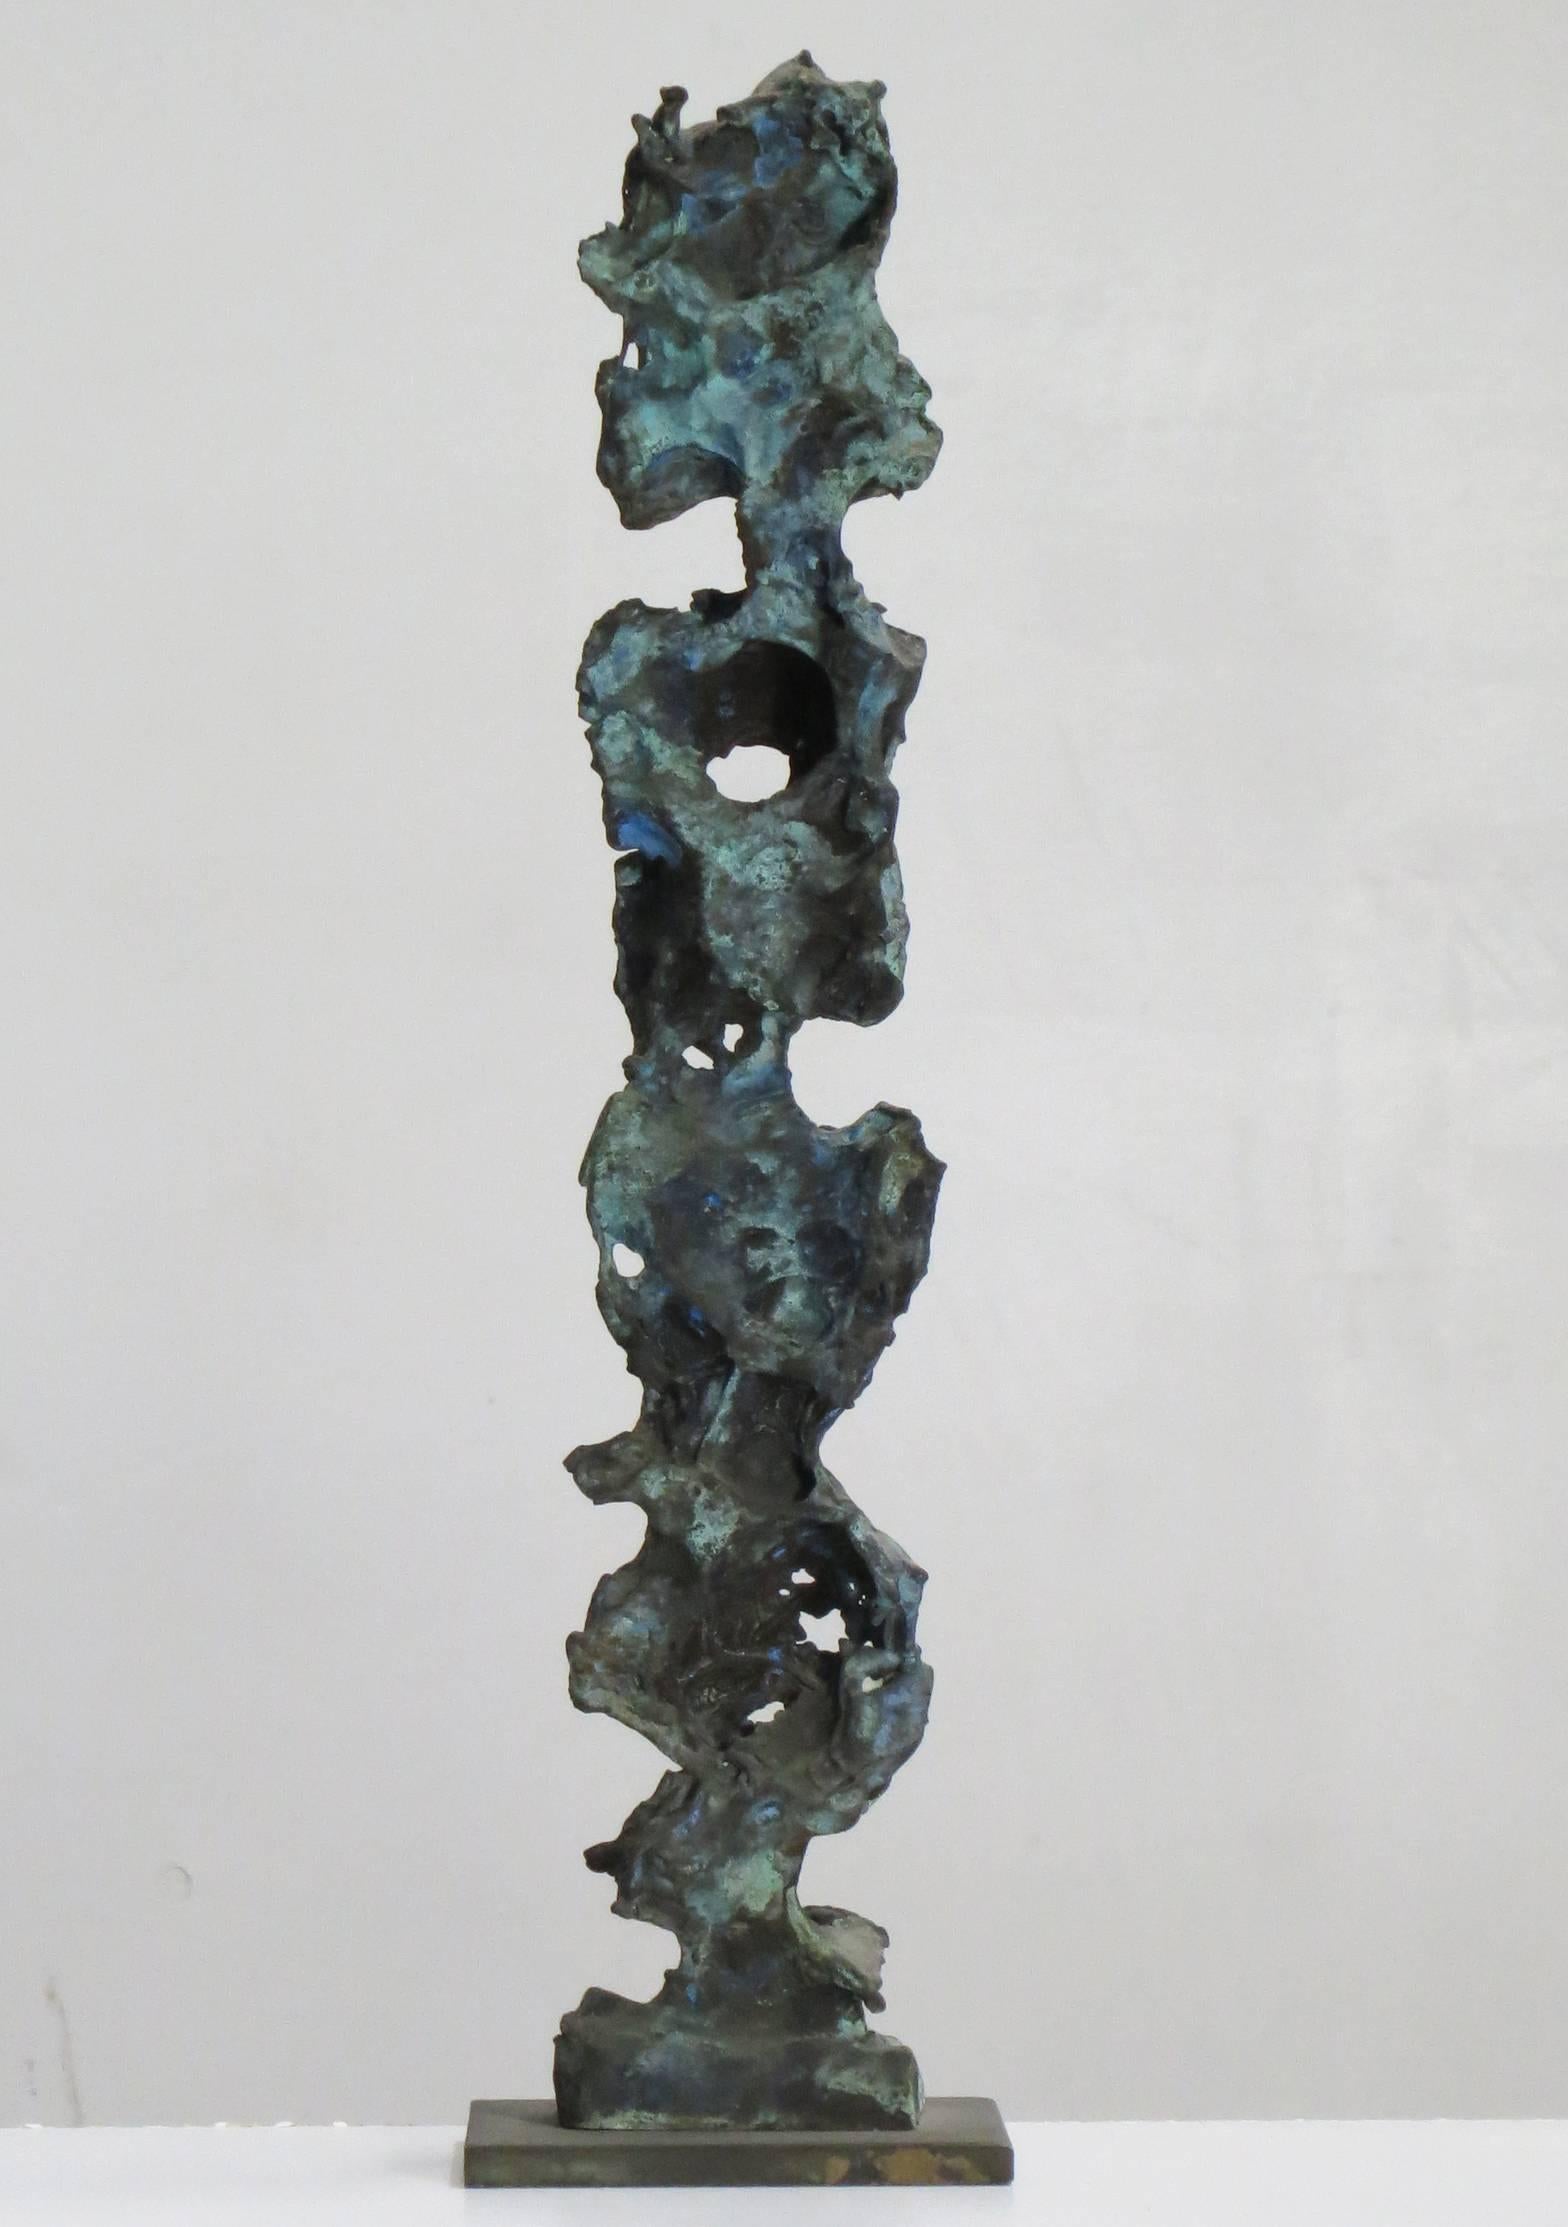 "Stoic", intricately carved, textured tabletop bronze with a blue green patina   - Sculpture by Howard Kalish